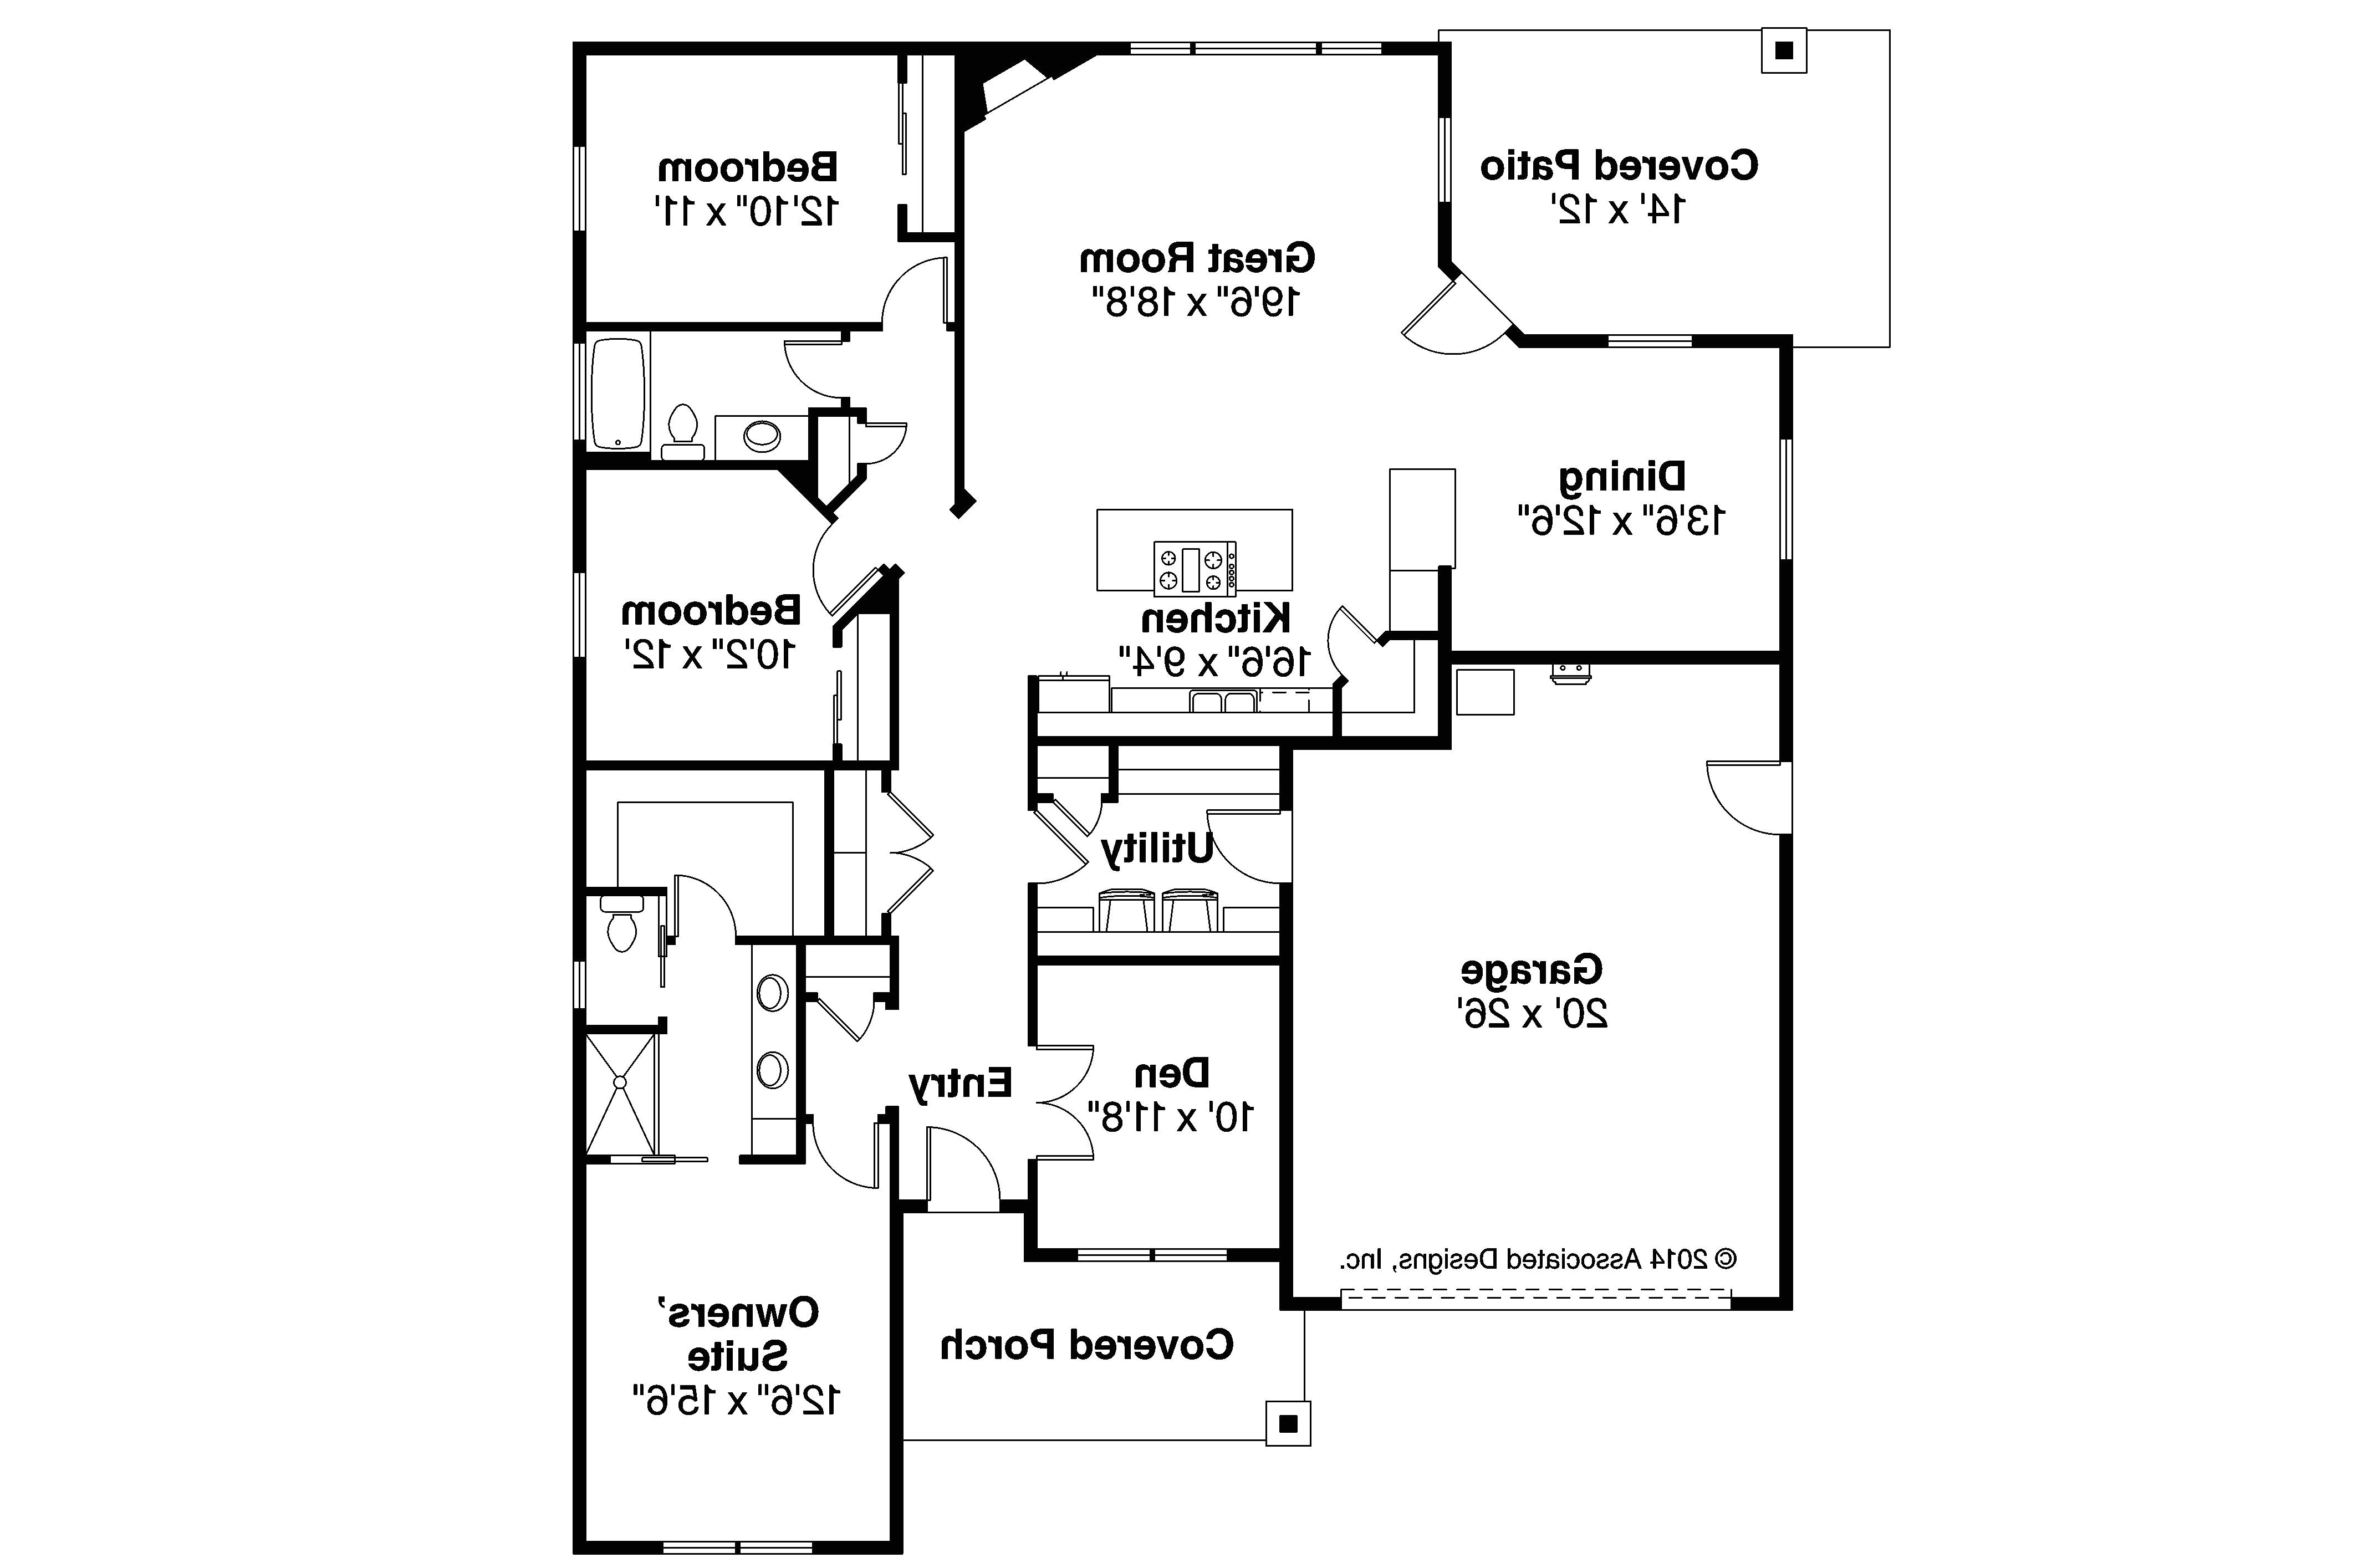 home floor plans for empty nesters